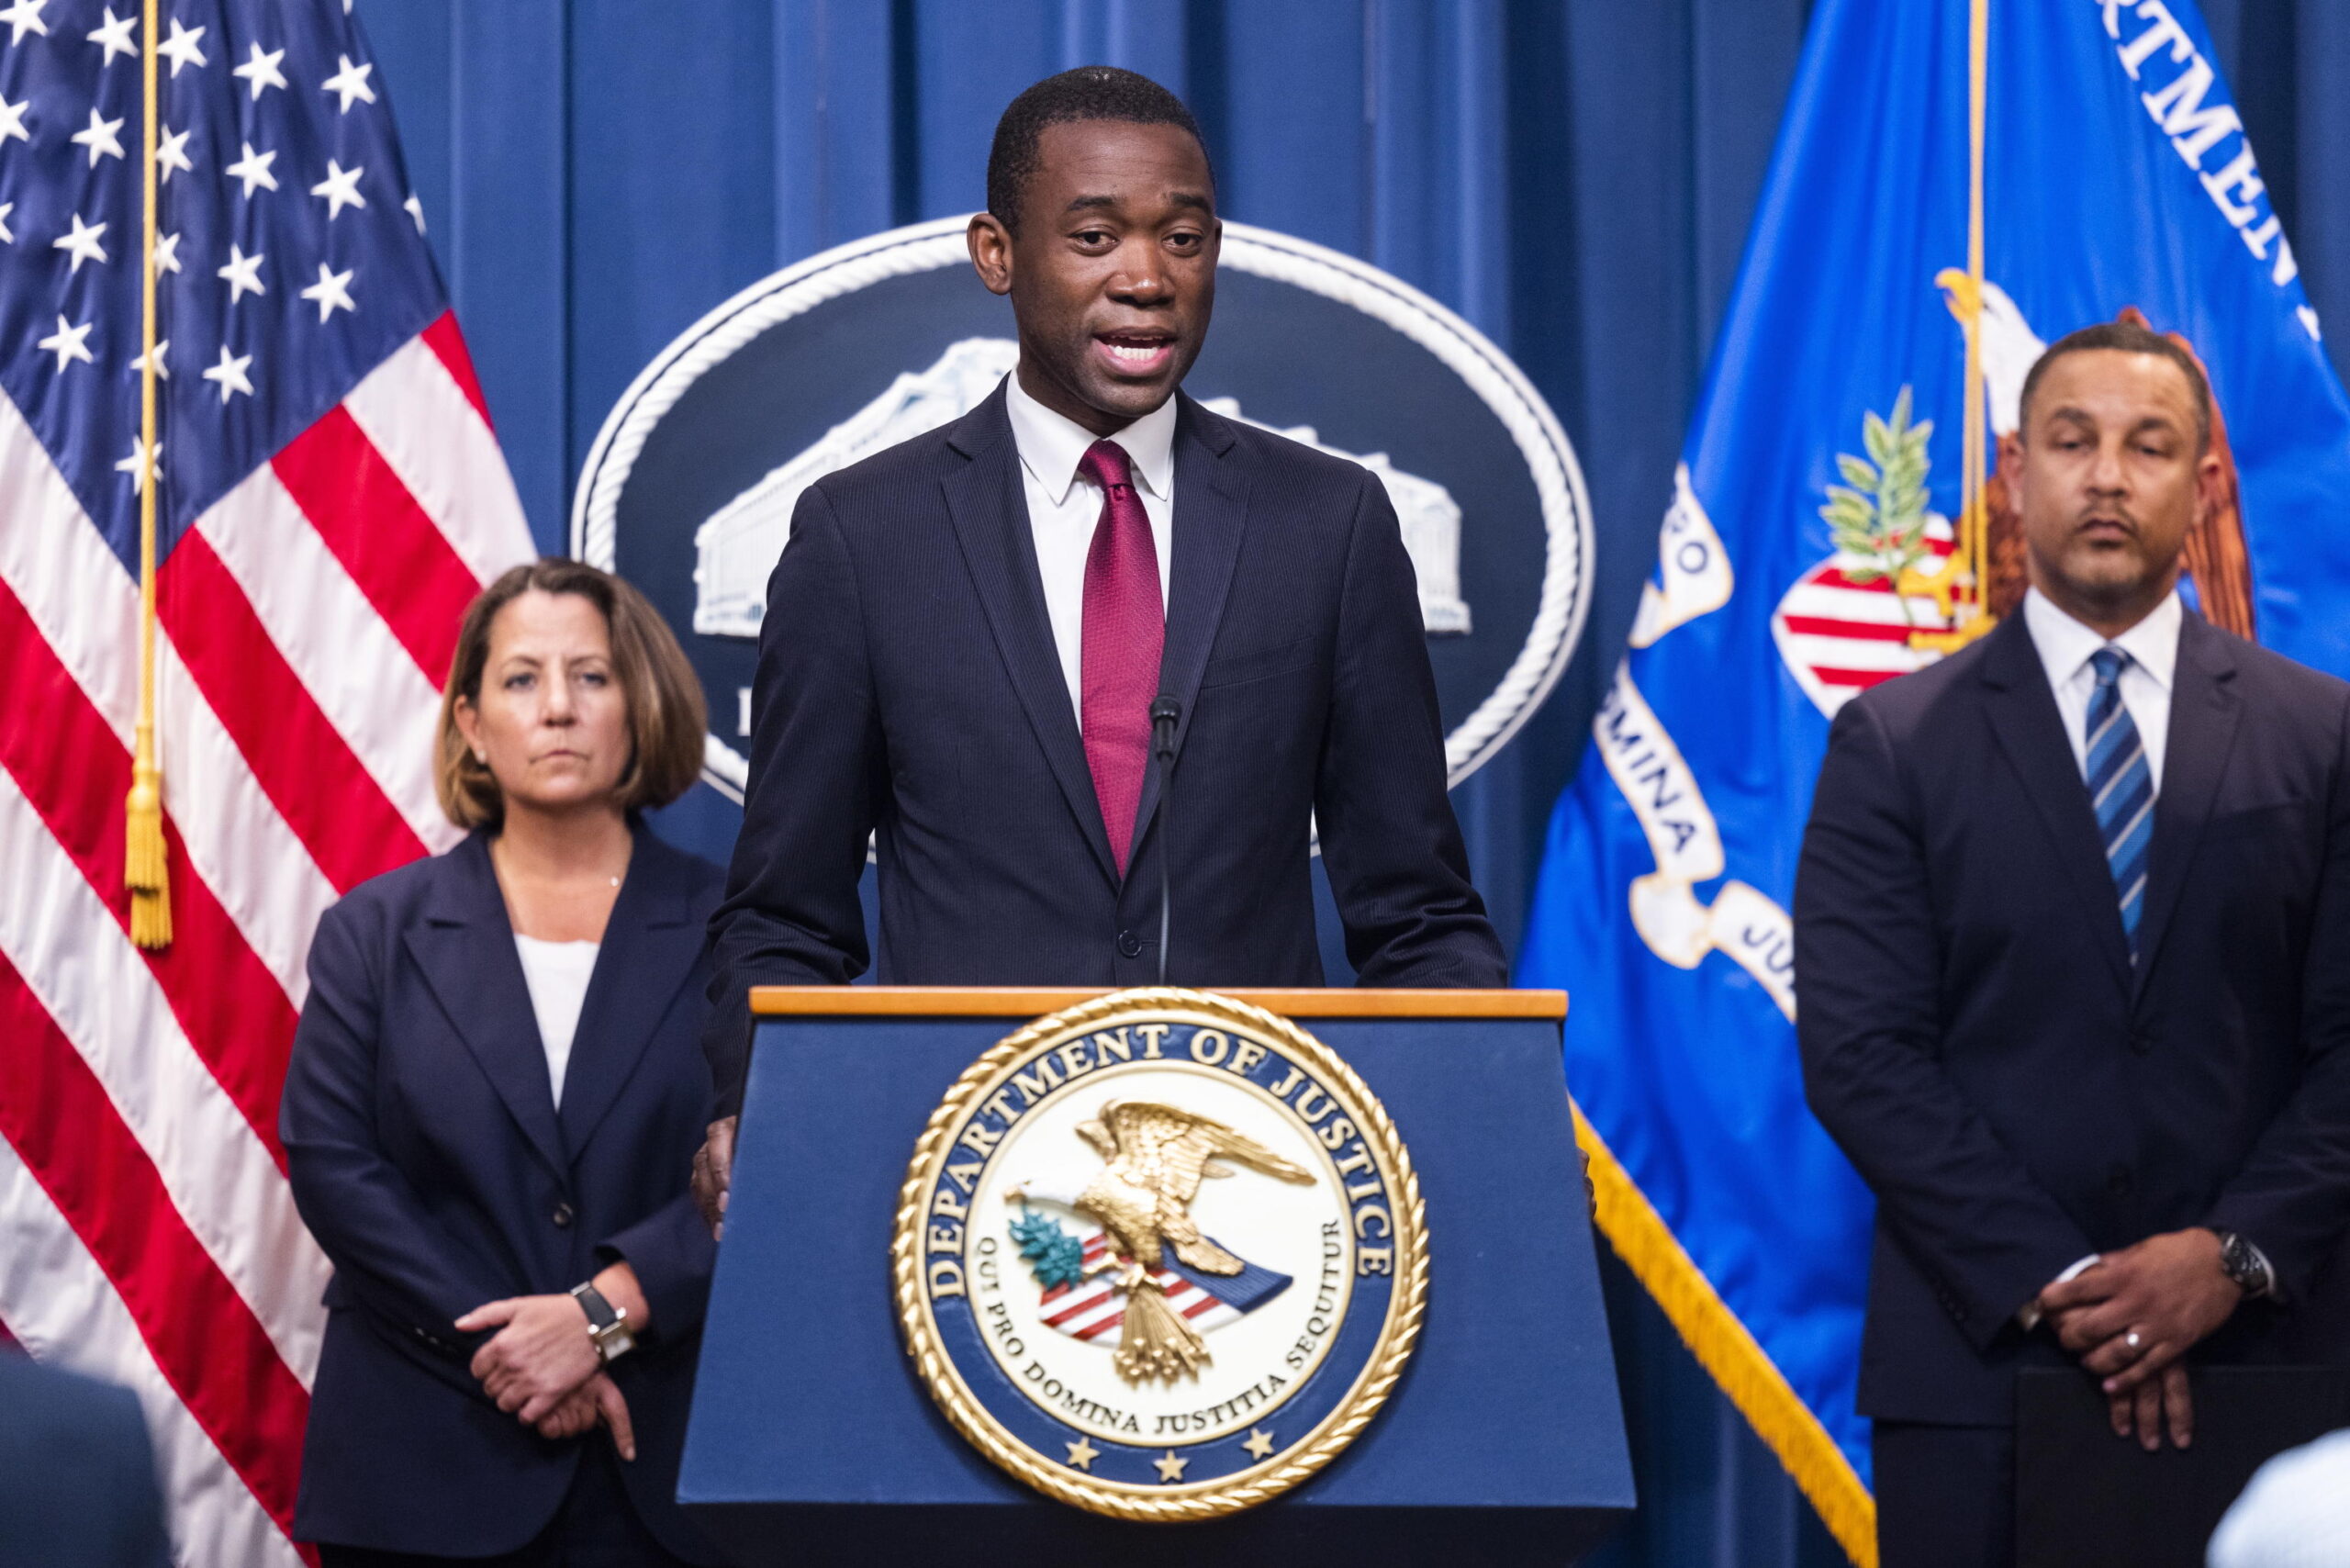 epa10413935 US Deputy Secretary of the Treasury Department Wally Adeyemo (C), alongside Deputy Attorney General Lisa Monaco (L) and US Attorney Breon Peace (R), speaks at a press conference to announce the arrest of Anatoly Legkodymov, founder of the cryptocurrency exchange Bitzlato, at the Department of Justice in Washington, DC, USA, 18 January 2023. Legkodymov, a Russian national living in China, was arrested in Miami for allegedly running a vast money laundering operation through Bitzlato.  EPA/JIM LO SCALZO